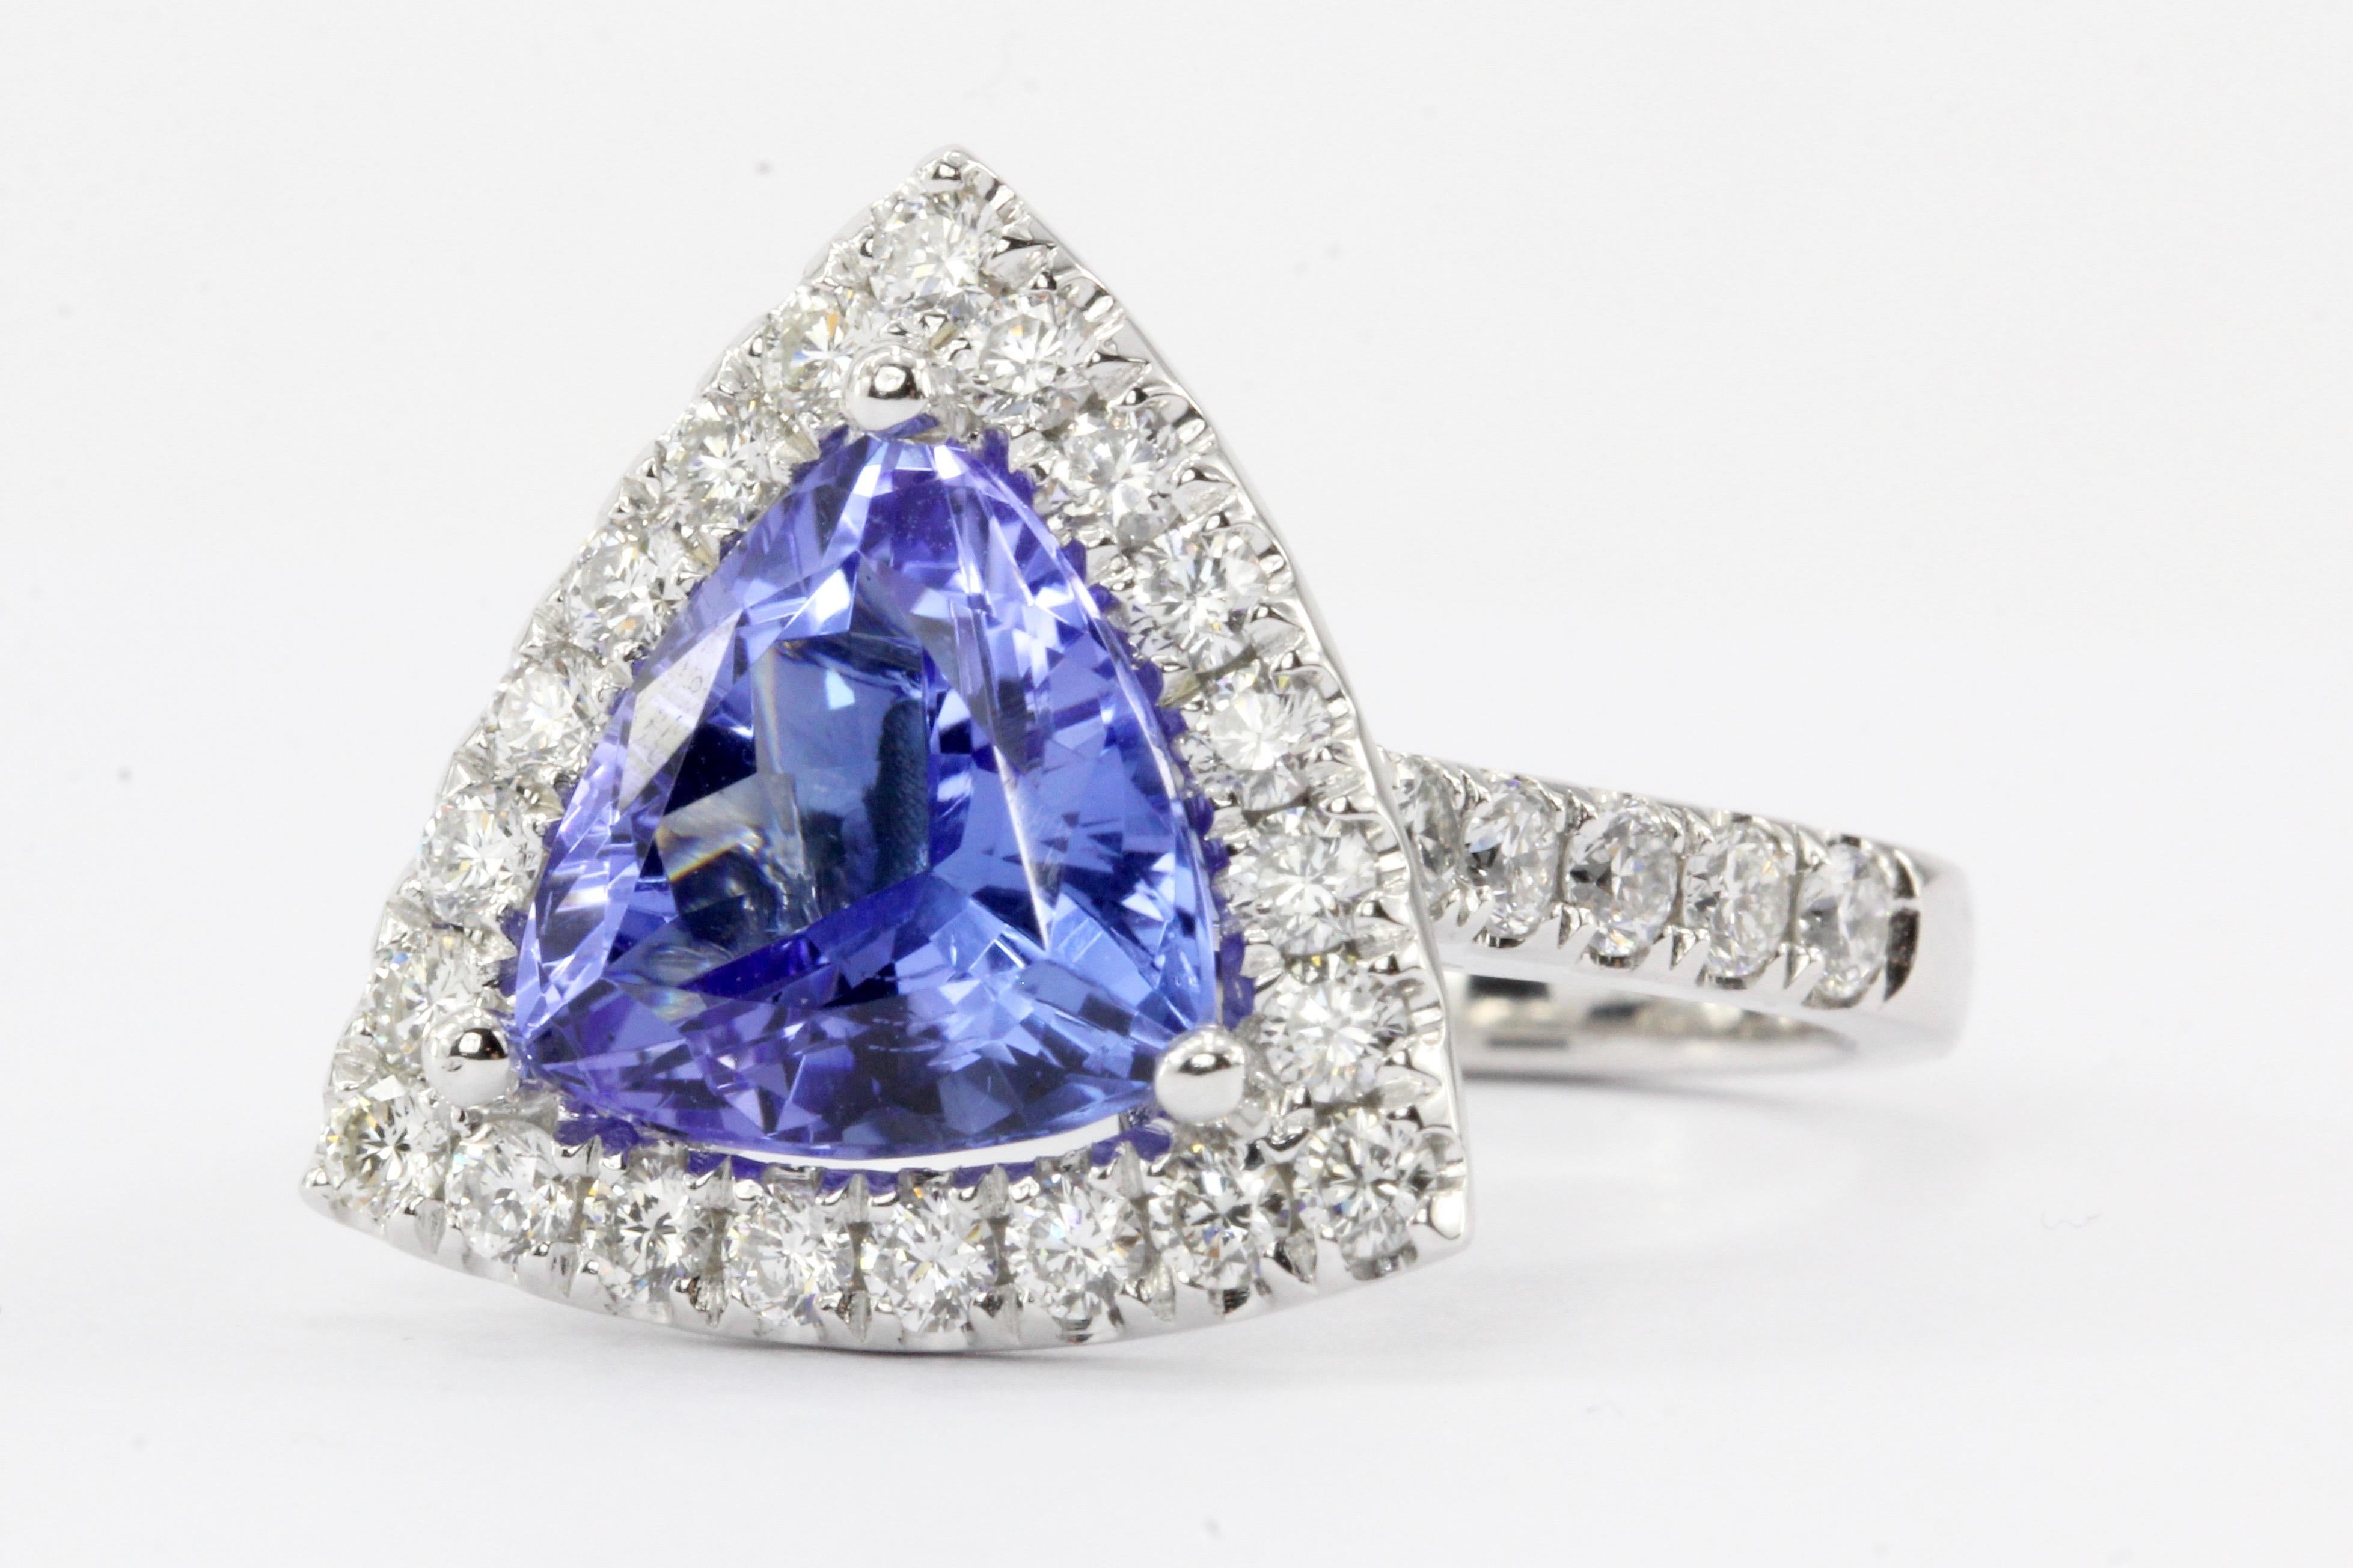 Era: Modern

Composition: 14K White Gold

Primary Stone: Tanzanite

Carat Weight: 4 Carats

Secondary Stone: Diamond

Carat Weight: 1.30 CTW

Color: G/H

Clarity: Vs2/Si1

Size: 6